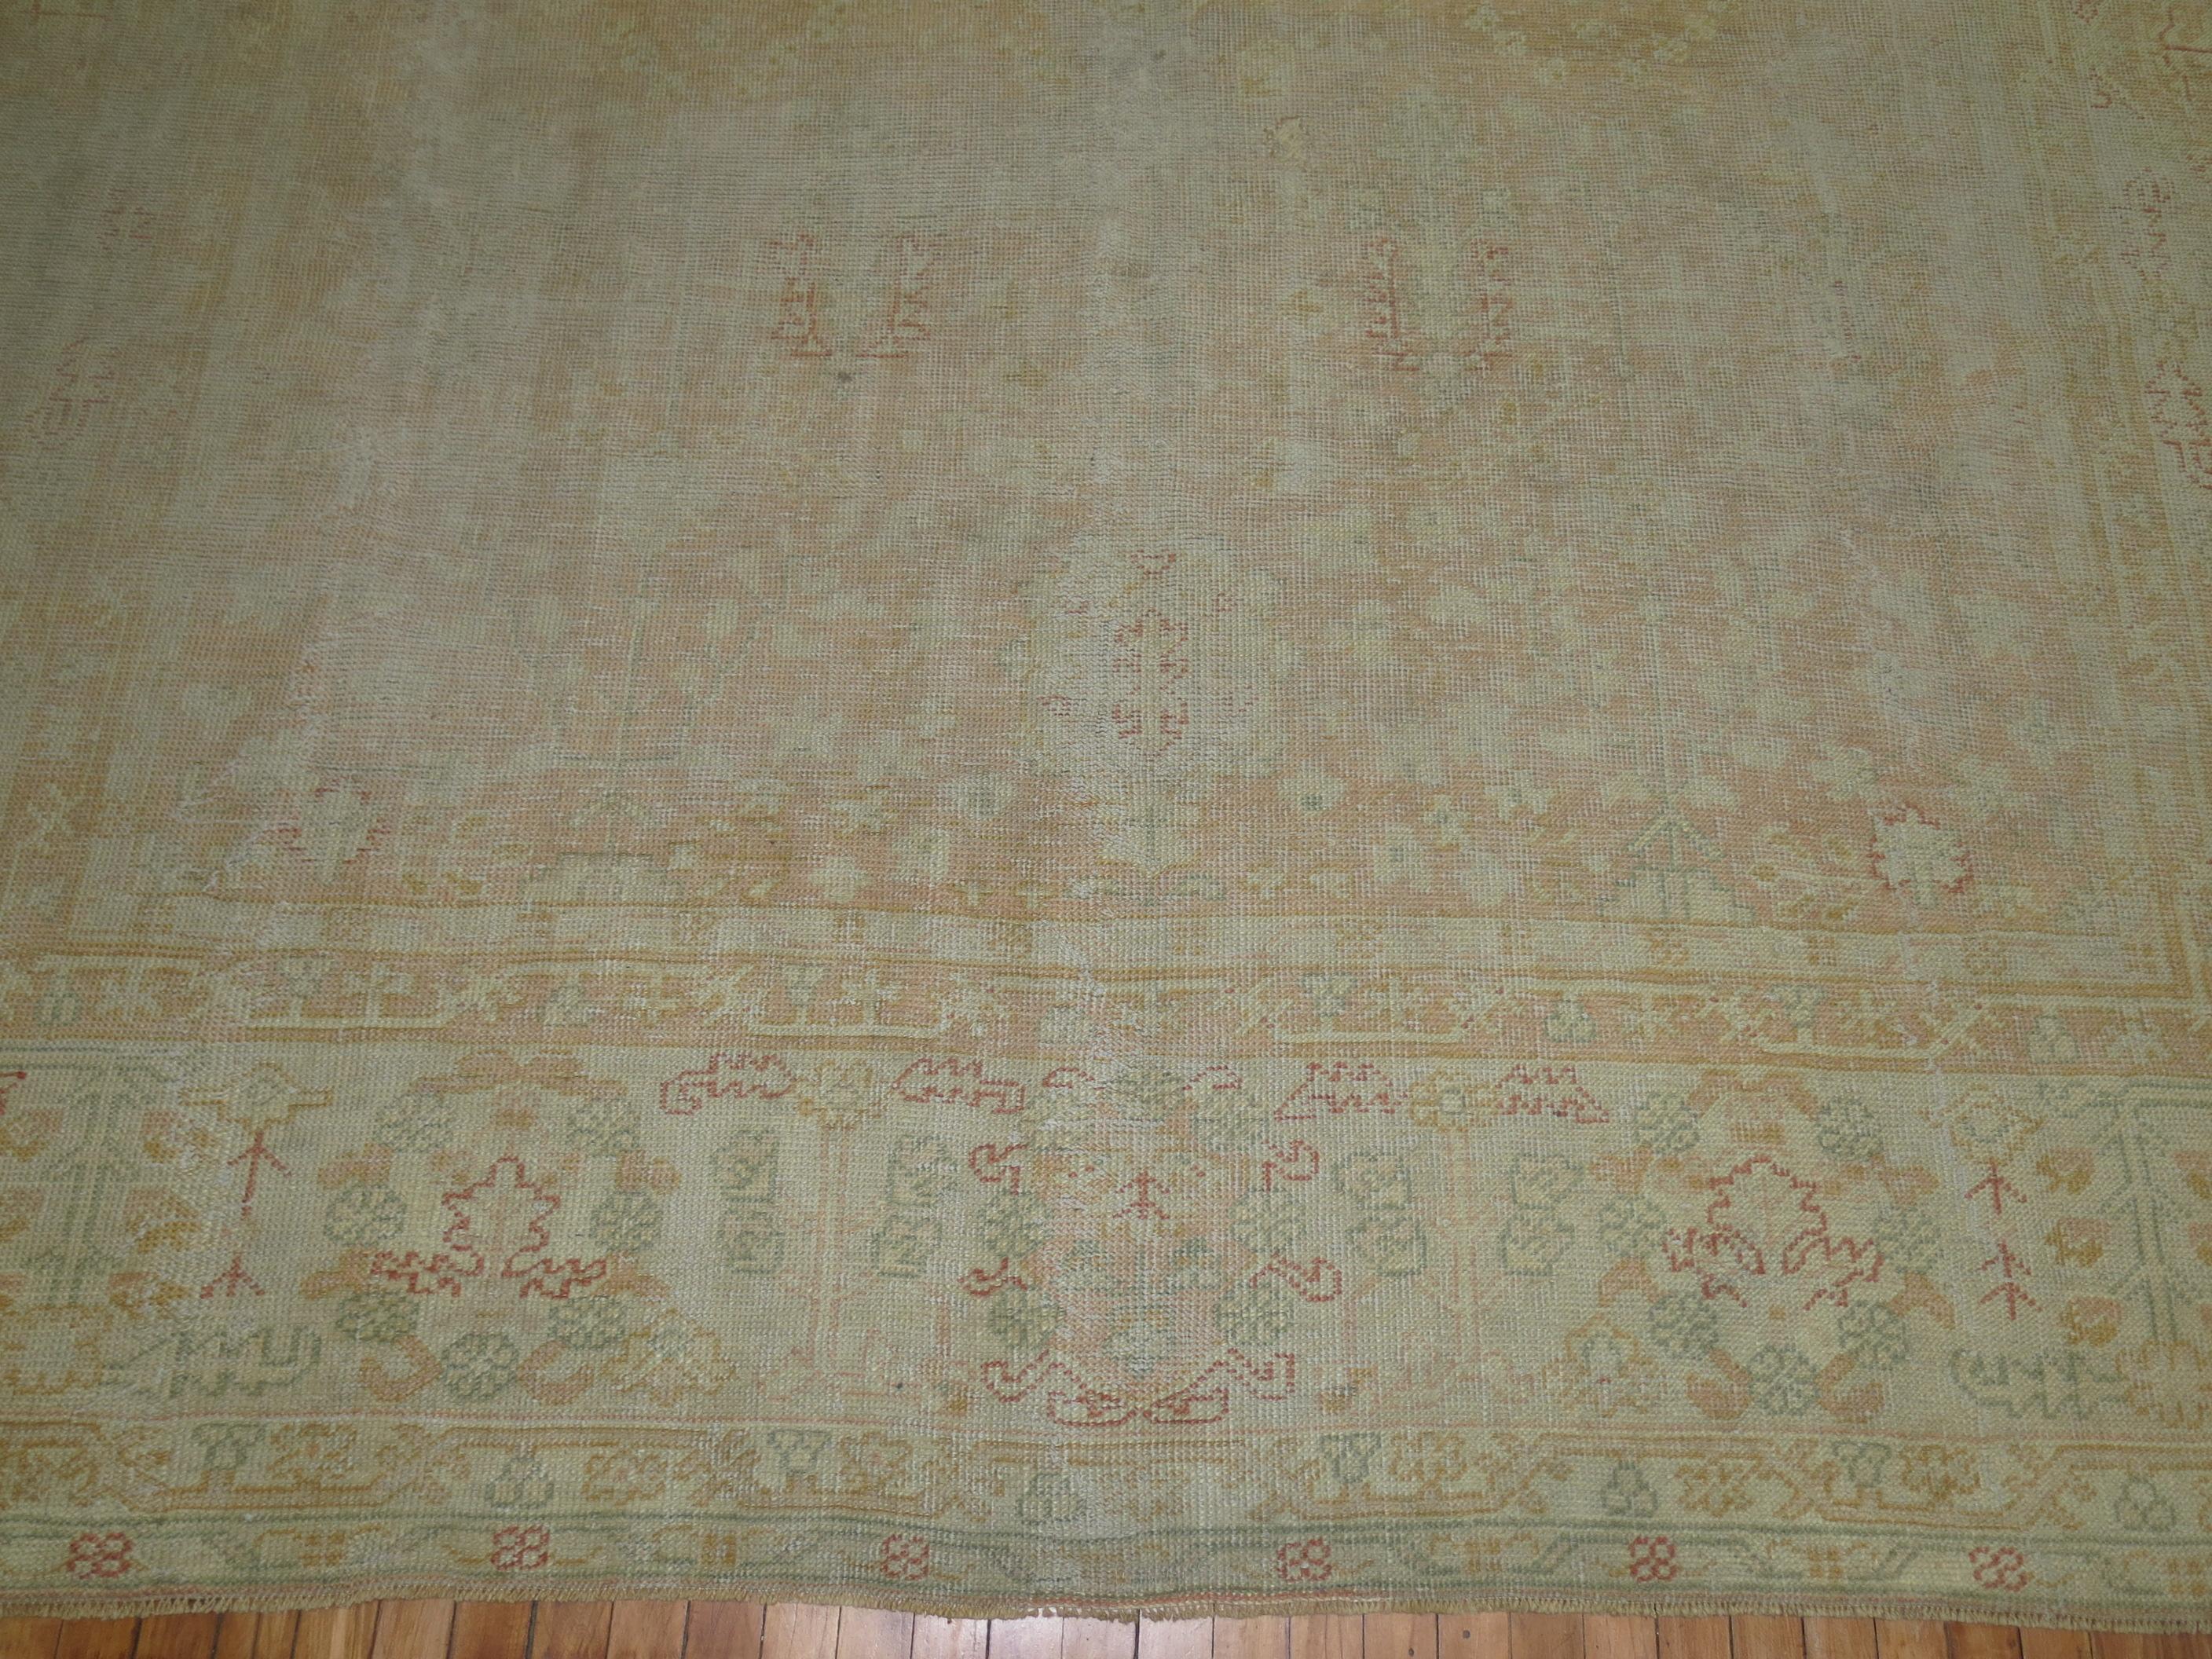 Worn Pale Peach Large Antique Turkish Oushak Rug In Fair Condition For Sale In New York, NY